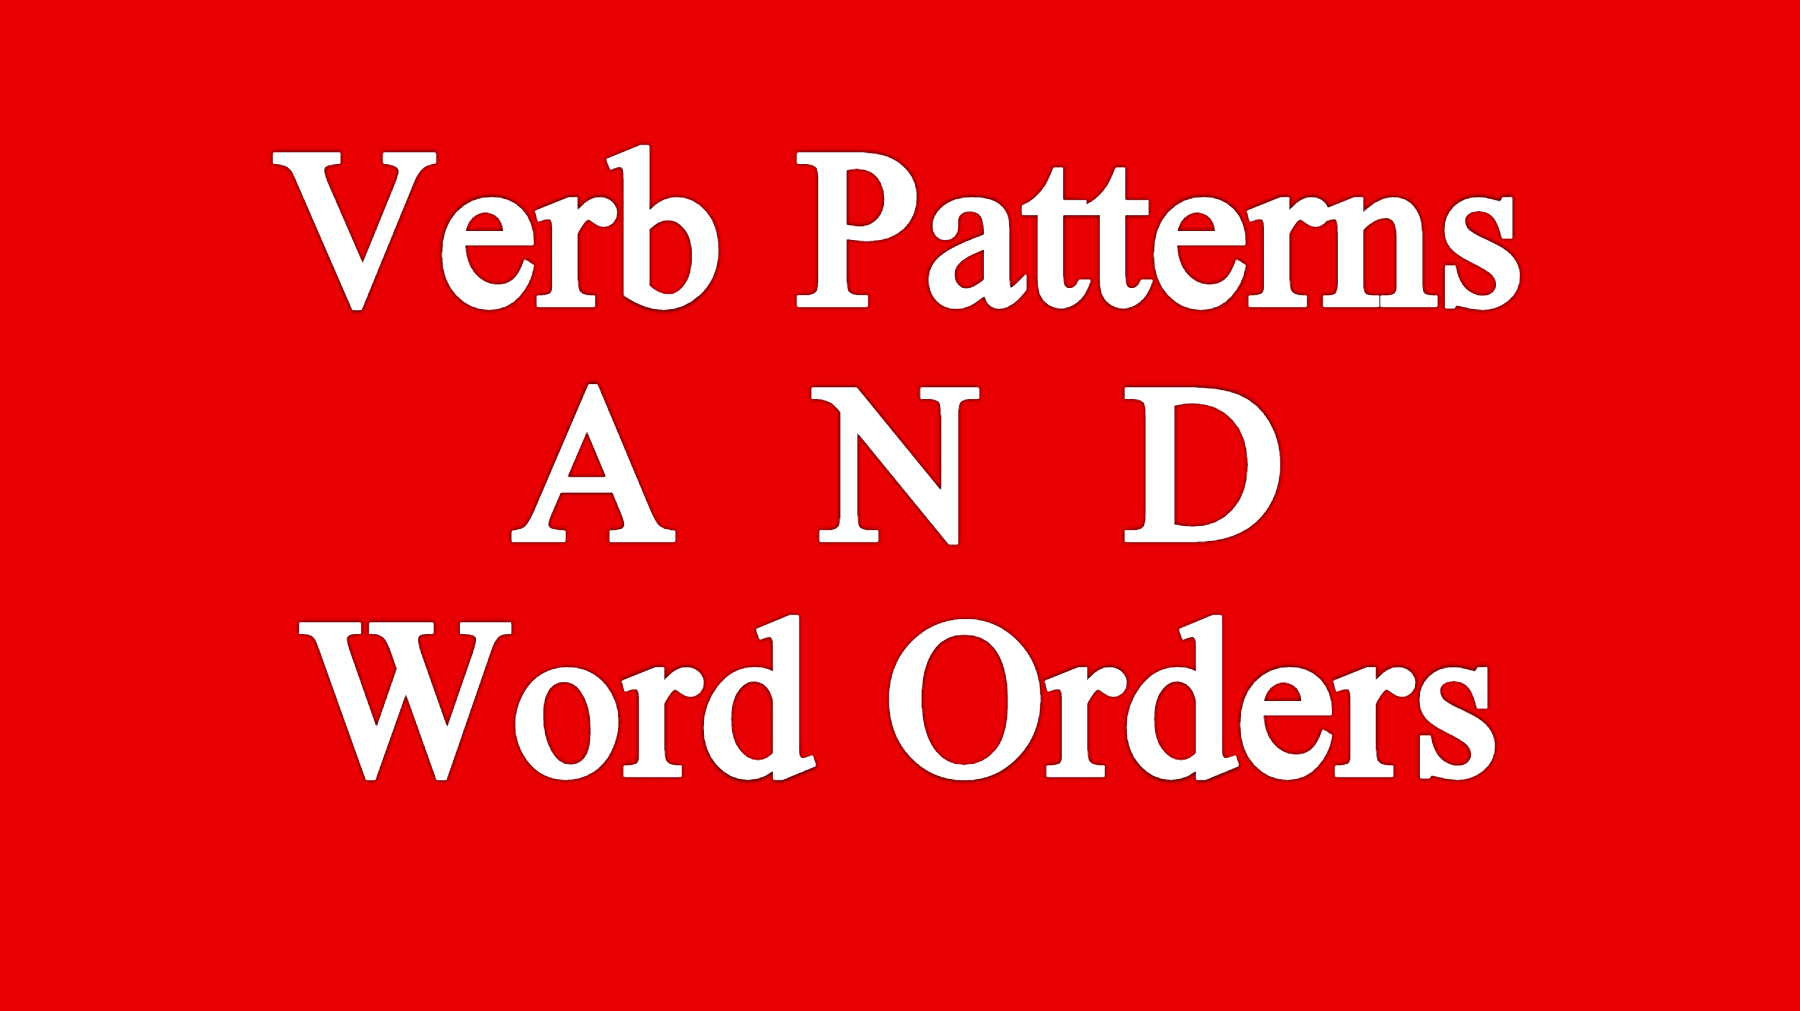 VERB PATTERNS AND WORD ORDERS